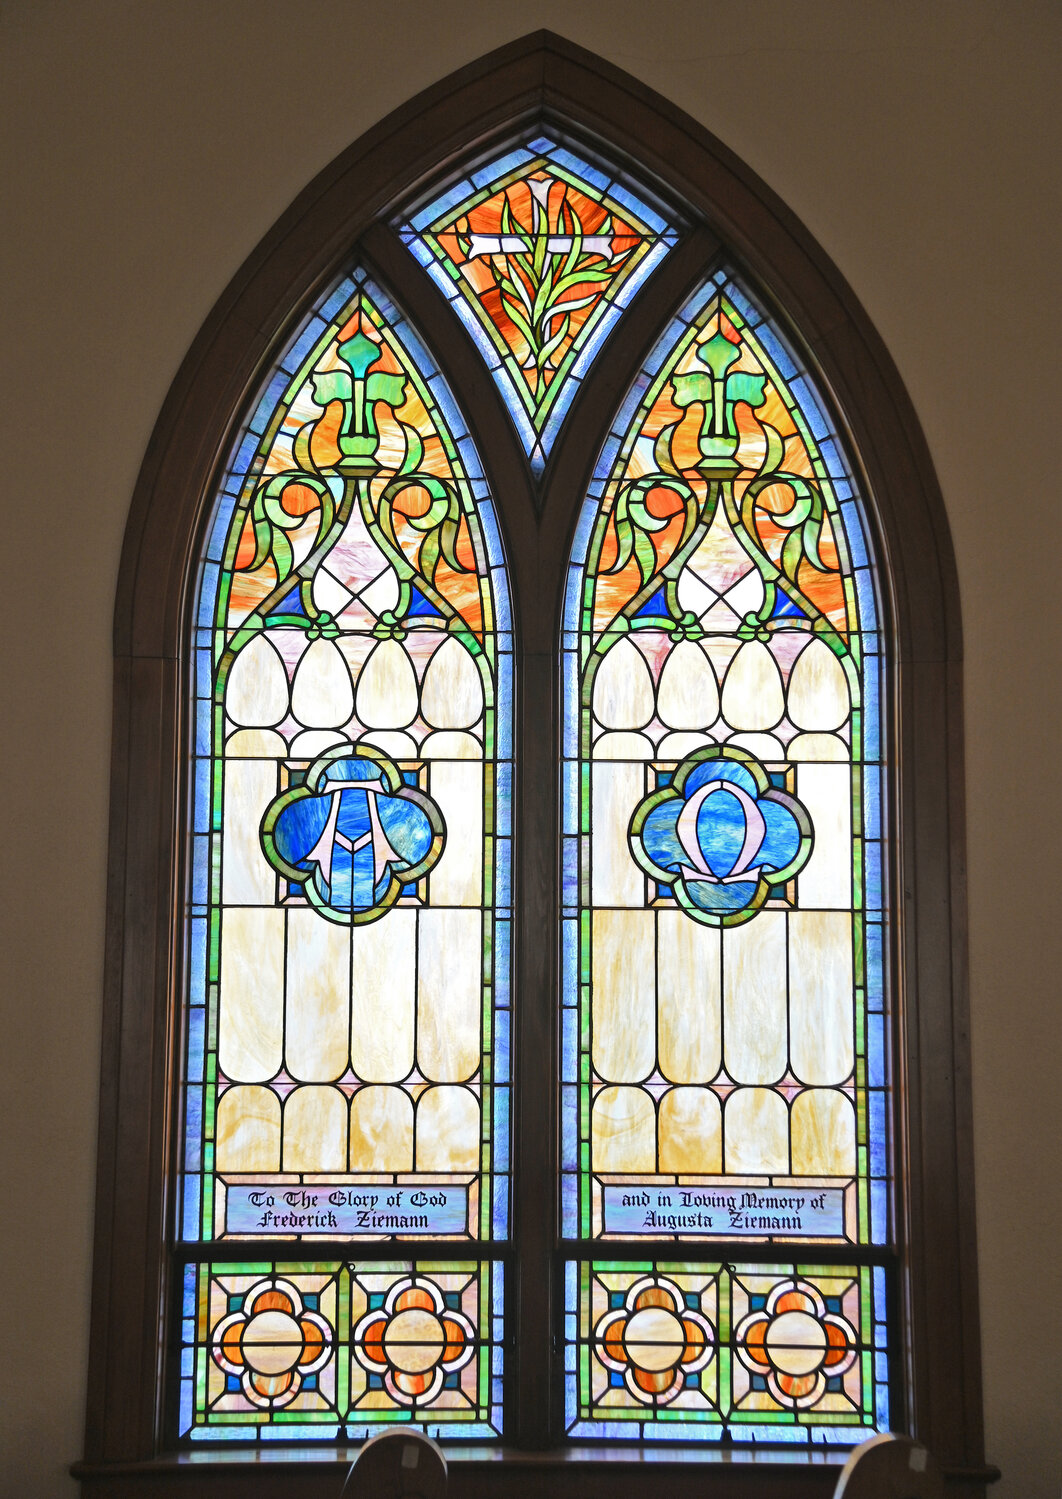 This stained glass window, displaying the symbols of Alpha — the beginning, and Omega — the end, is one of the historic windows inside Trinity Church at 215 W. Court St., Rome.